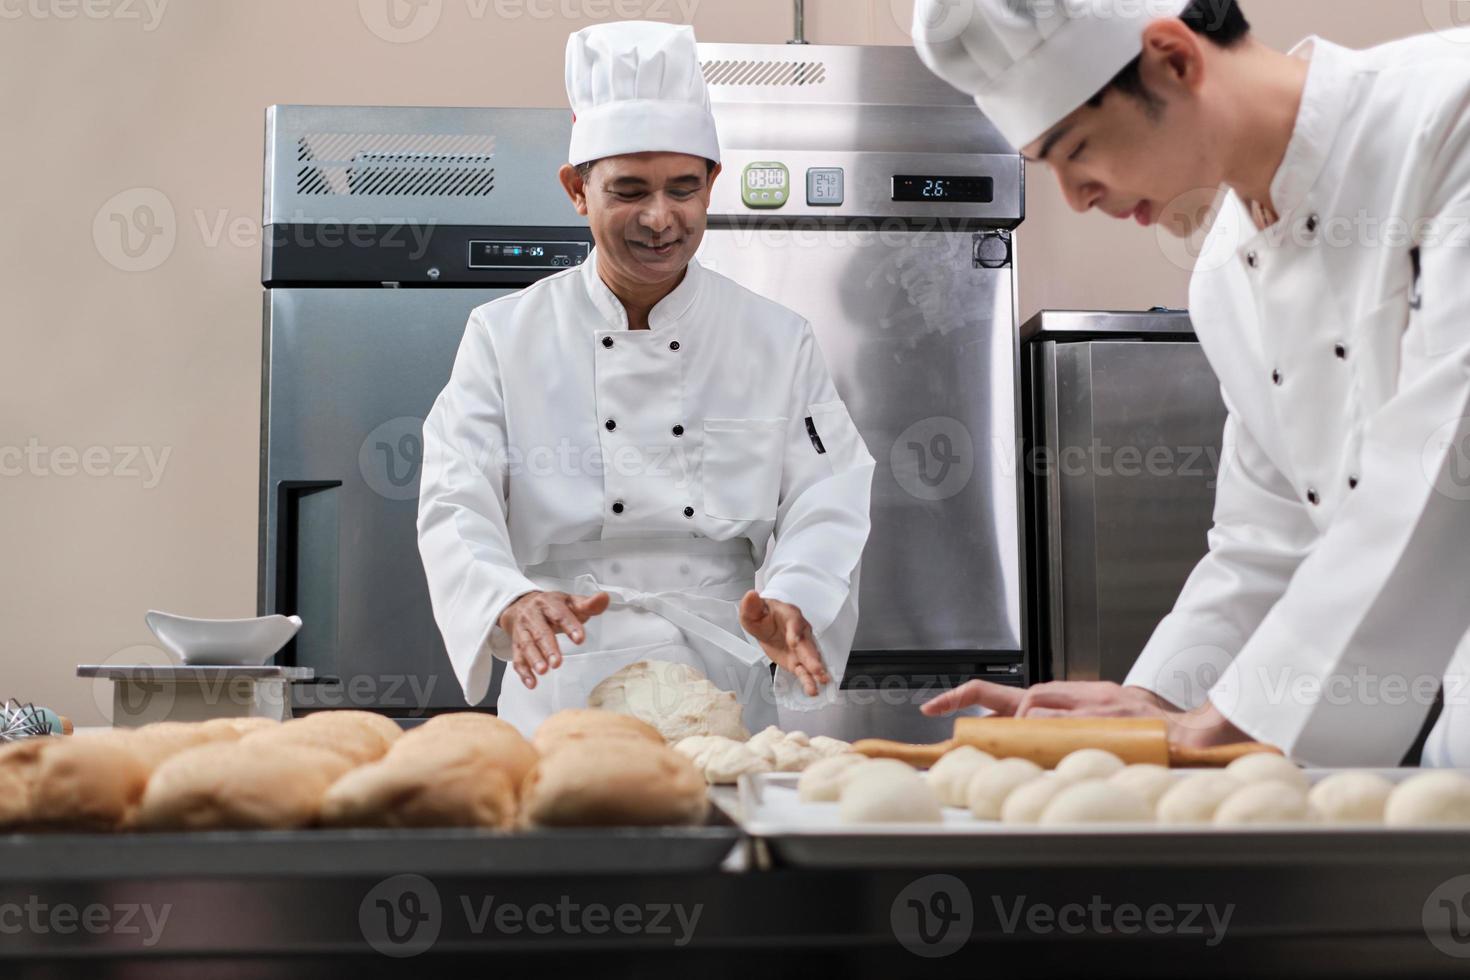 Two professional Asian male chefs in white cook uniforms and aprons are kneading pastry dough and eggs, preparing bread and fresh bakery food, baking in oven at stainless steel kitchen of restaurant. photo